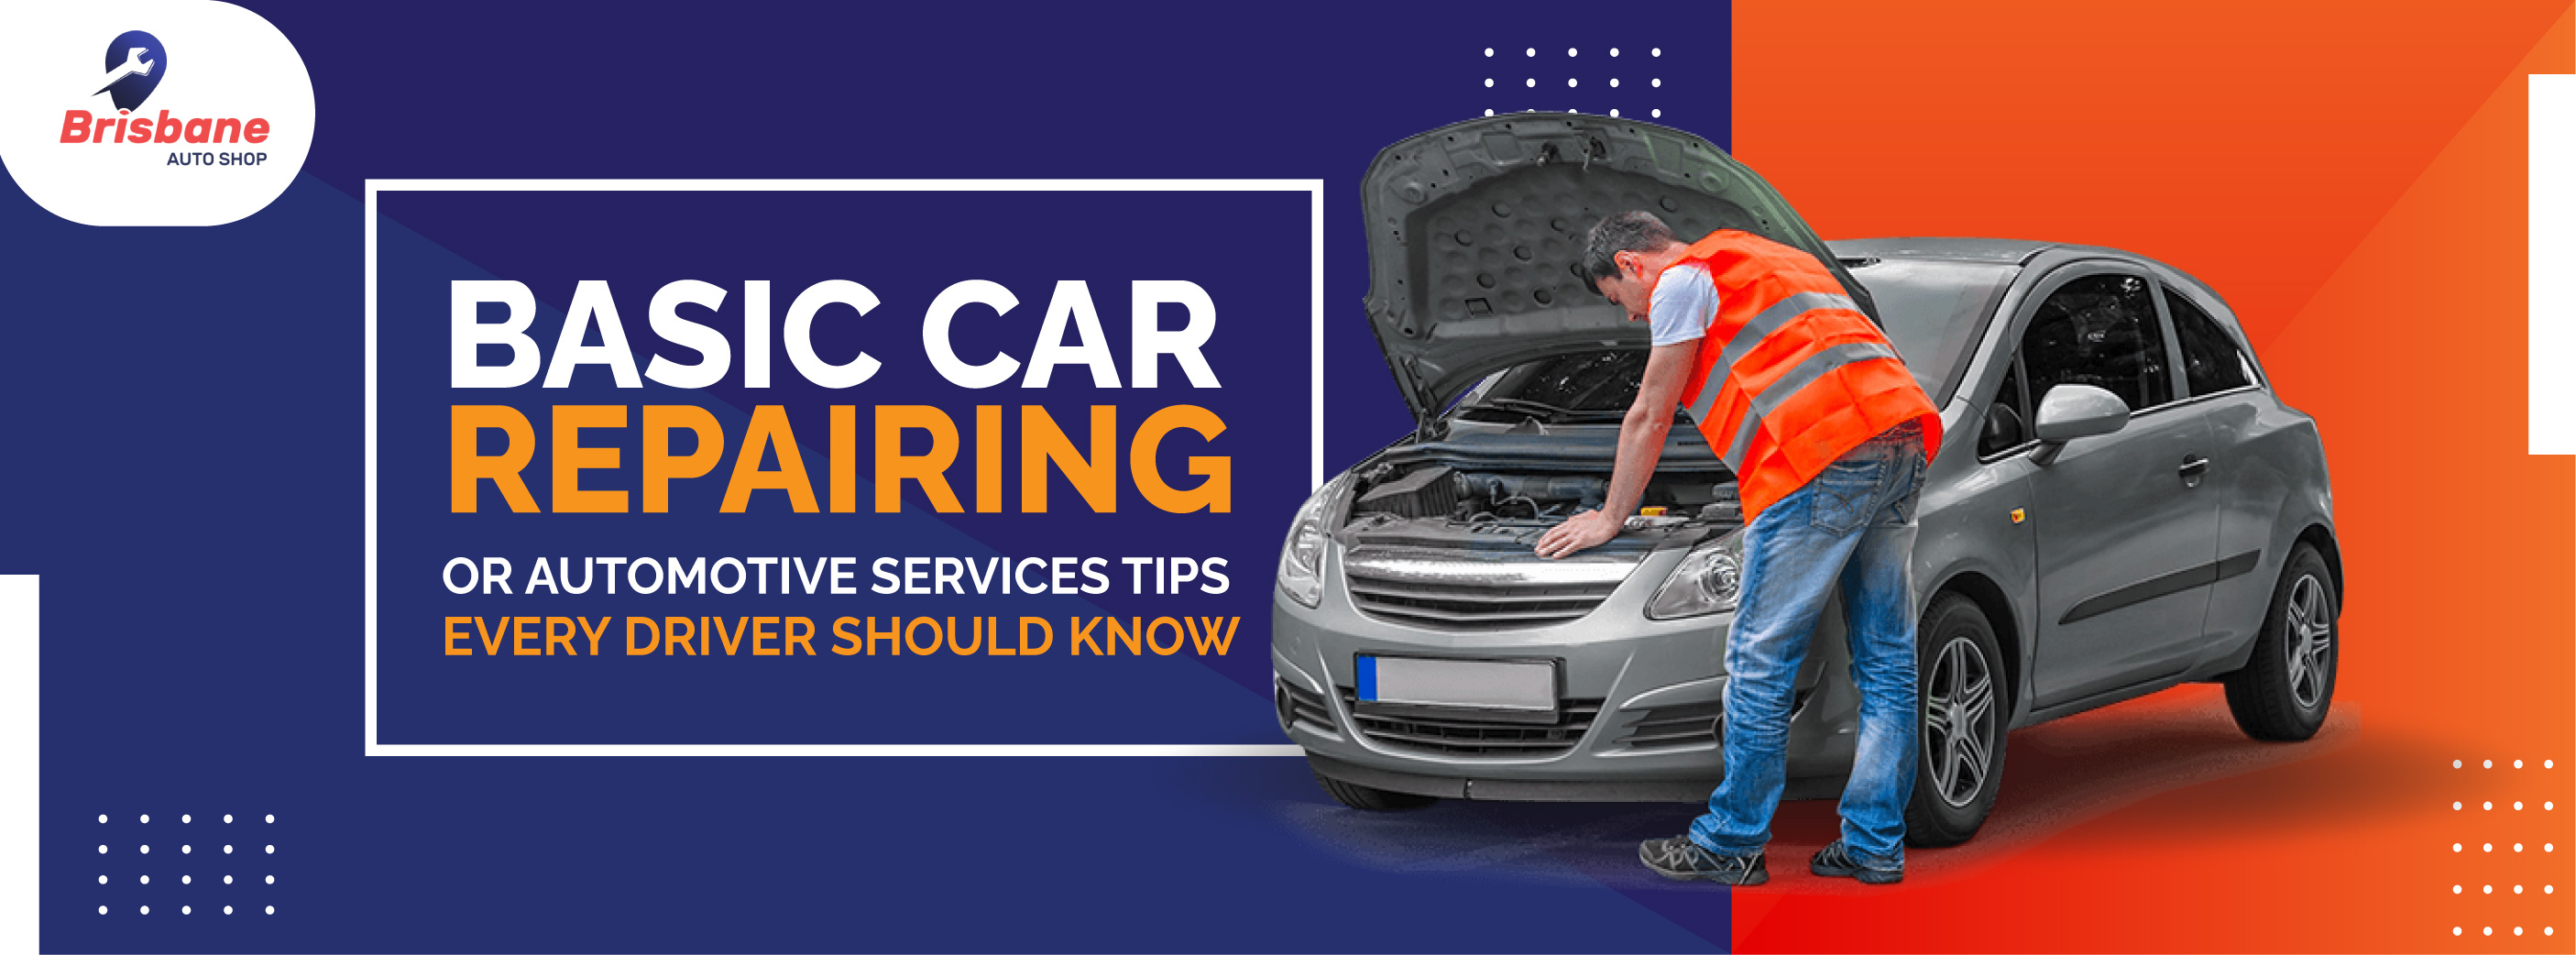 Basic Car Repairing or Automotive Service Tips